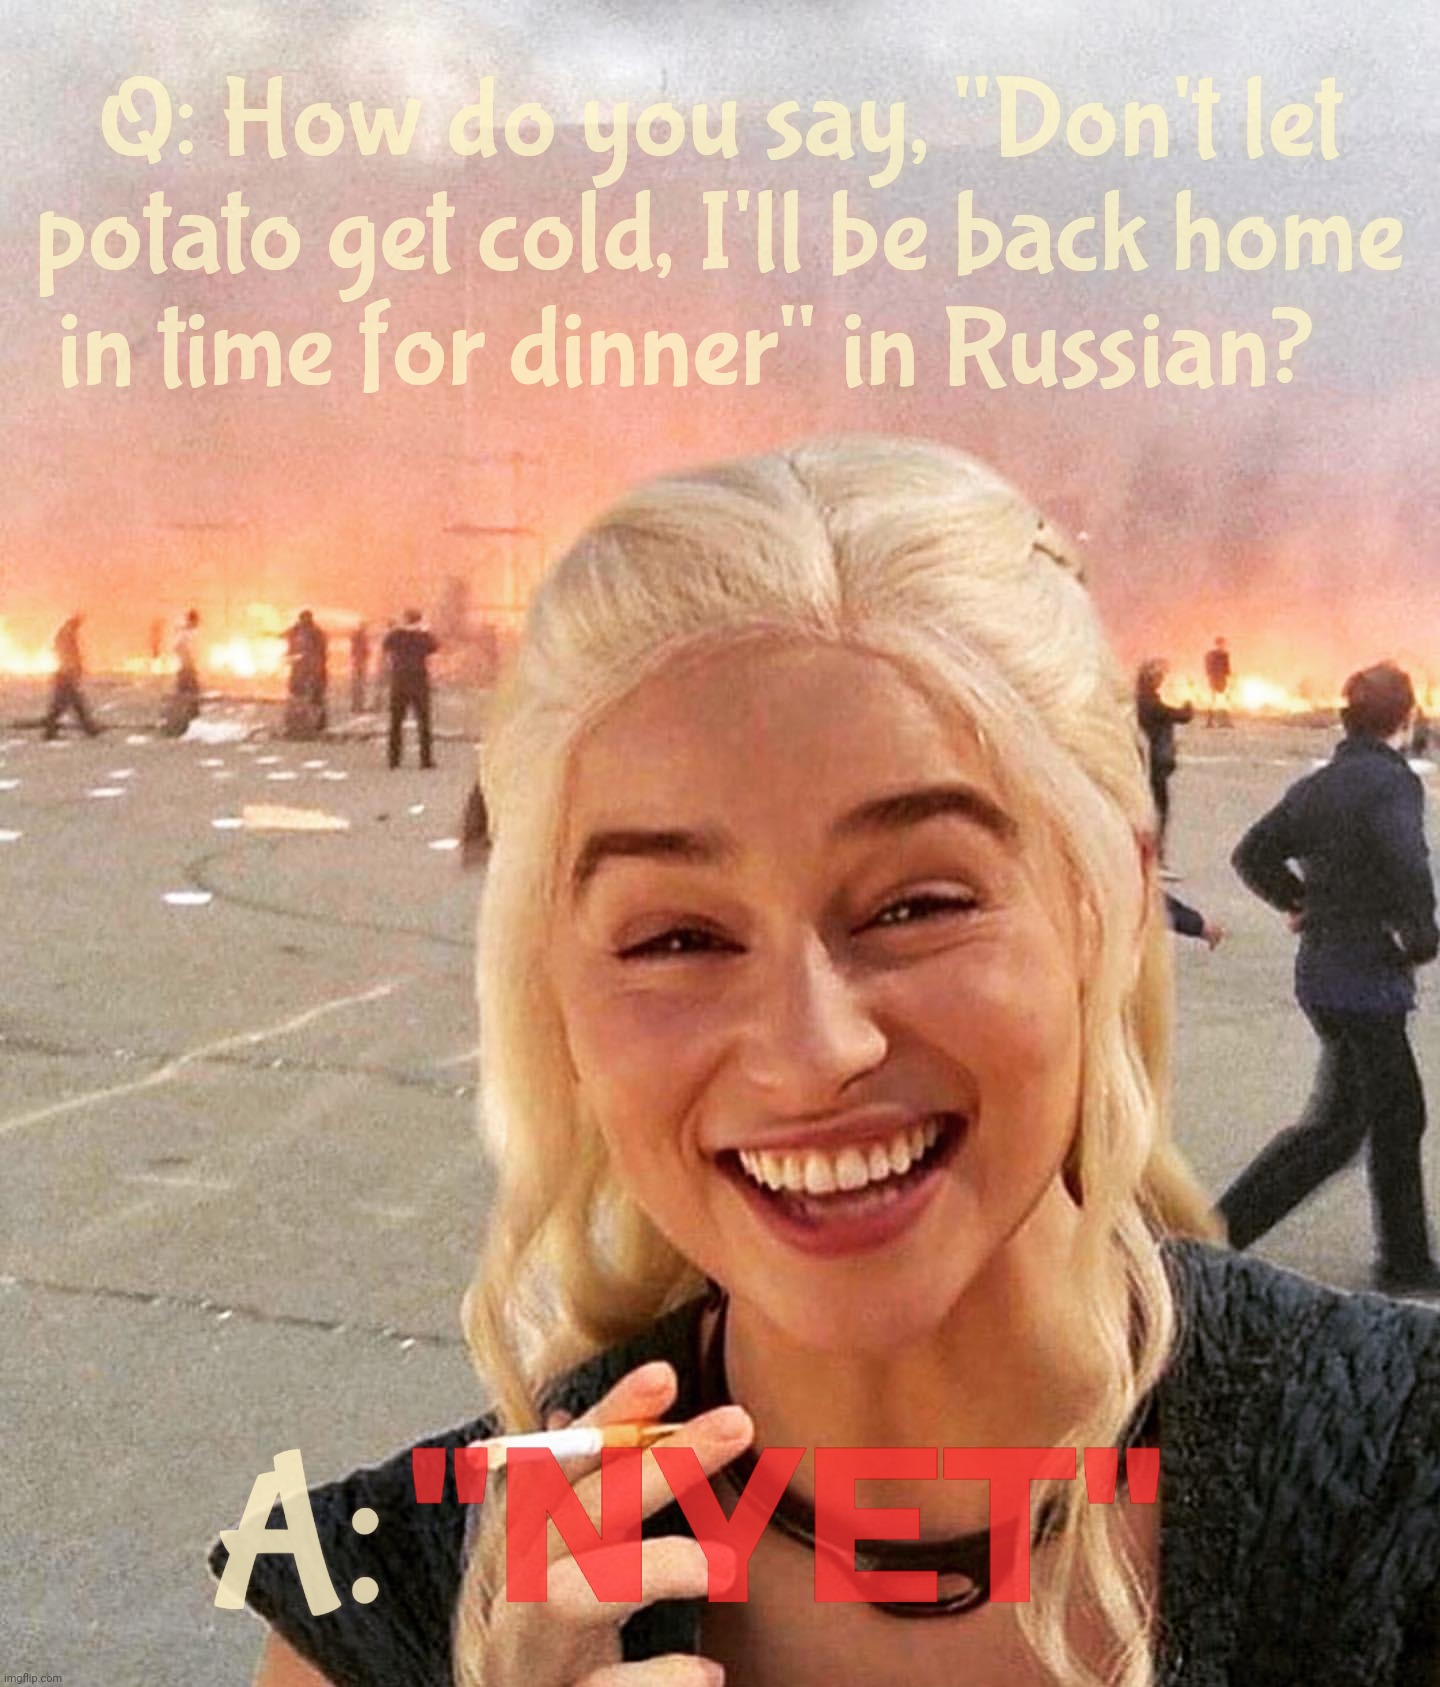 Dumbass Poostain's army only brought a lunch | Q: How do you say, "Don't let potato get cold, I'll be back home
in time for dinner" in Russian? "NYET" A: | image tagged in disaster smoker girl,russo-ukrainian war,poow widdle poostain,is potato,say ukranazi again you commie windbag,putin zhe grate | made w/ Imgflip meme maker